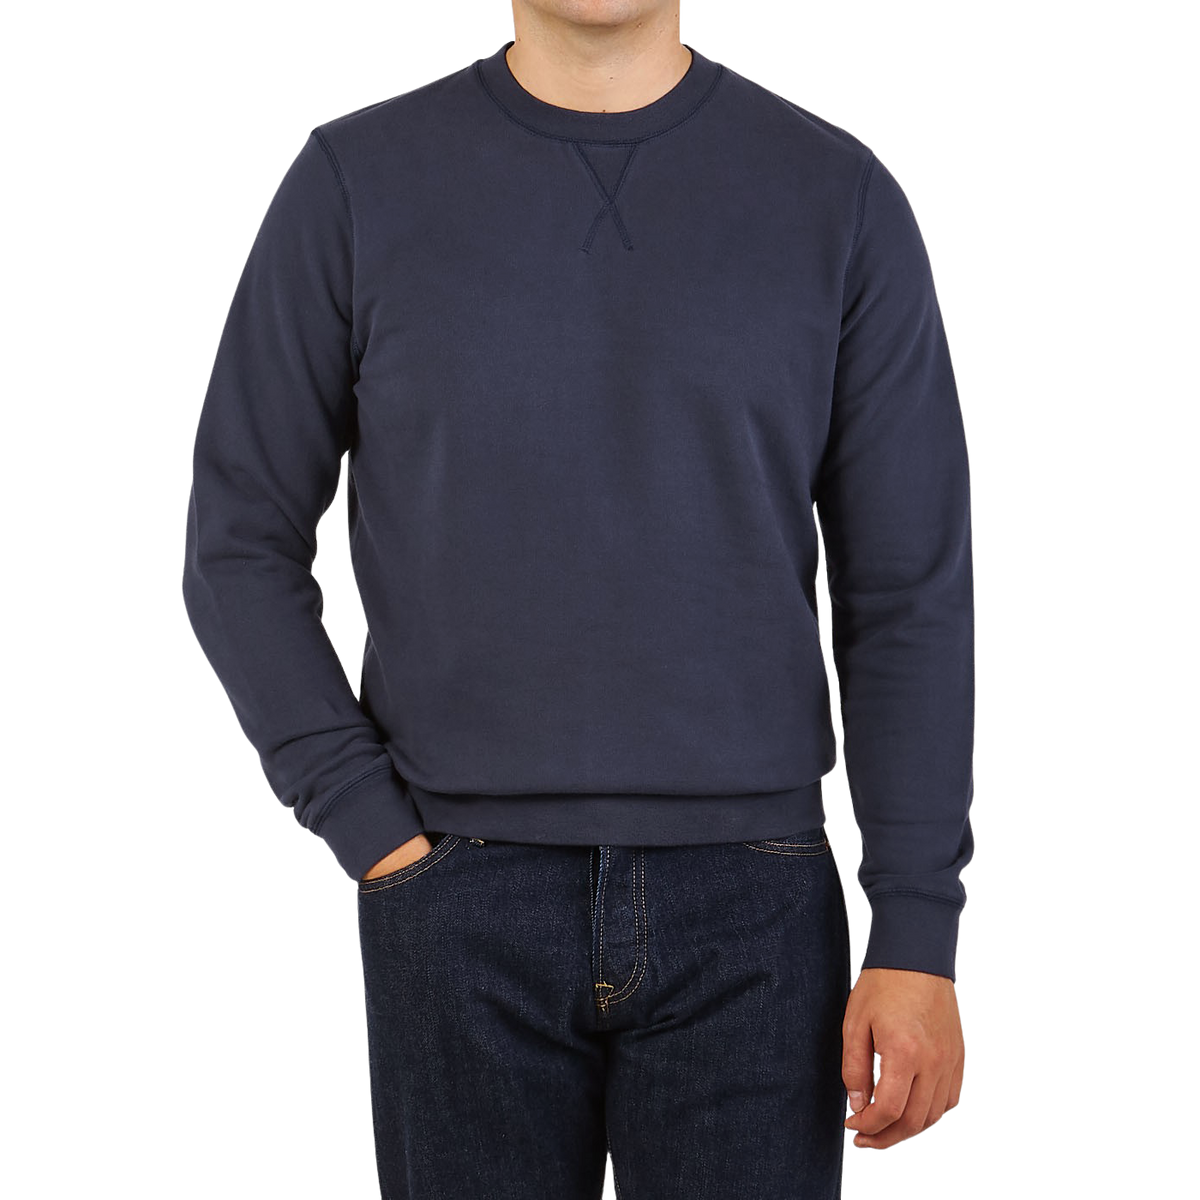 Sunspel Washed Blue Cotton Loopback Sweater Front